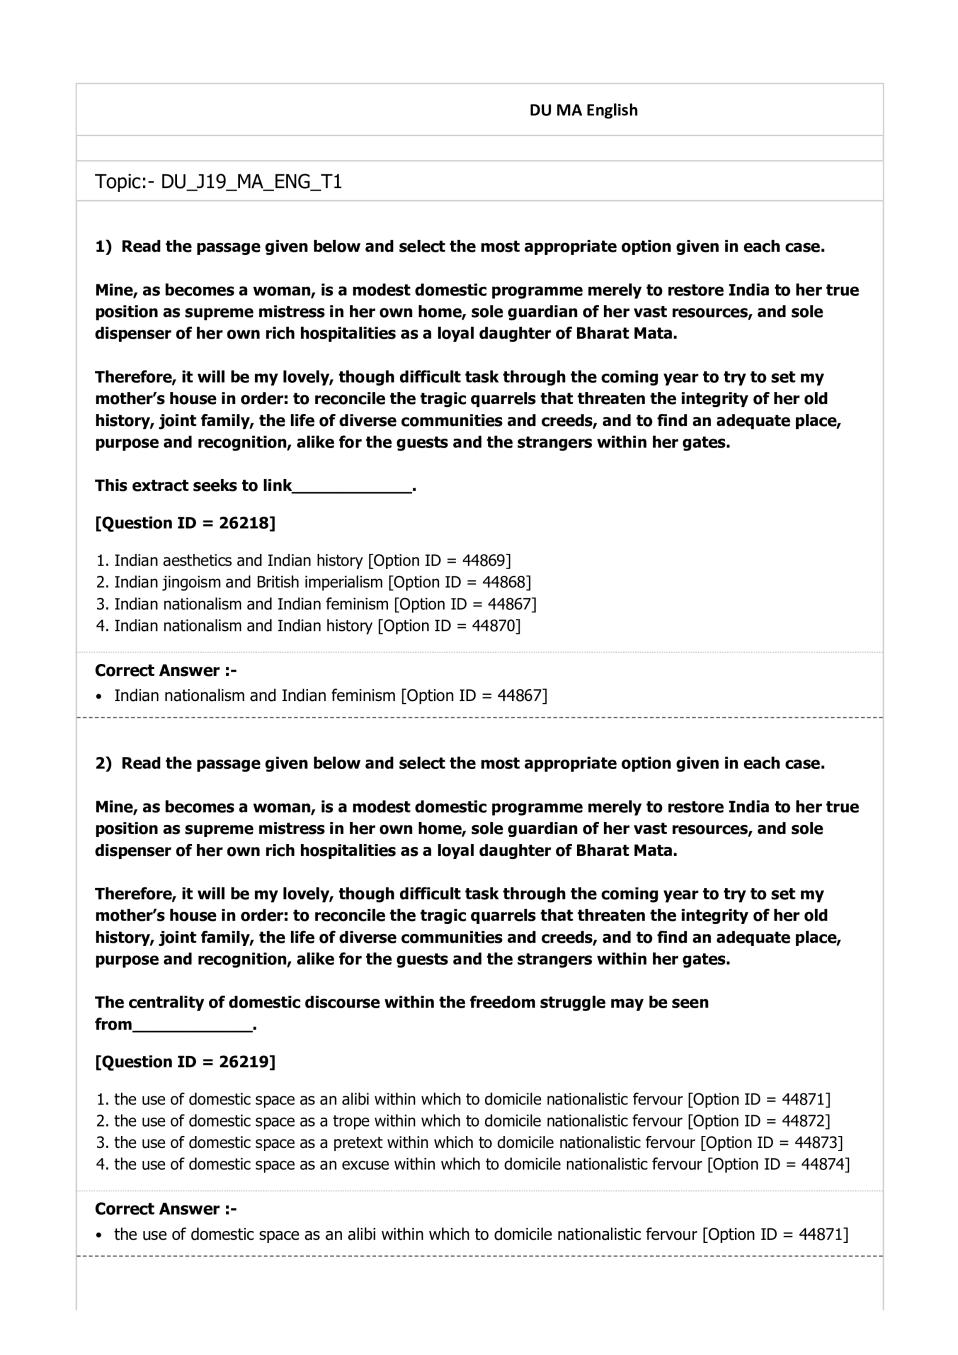 DUET Question Paper 2019 for MA English - Page 1